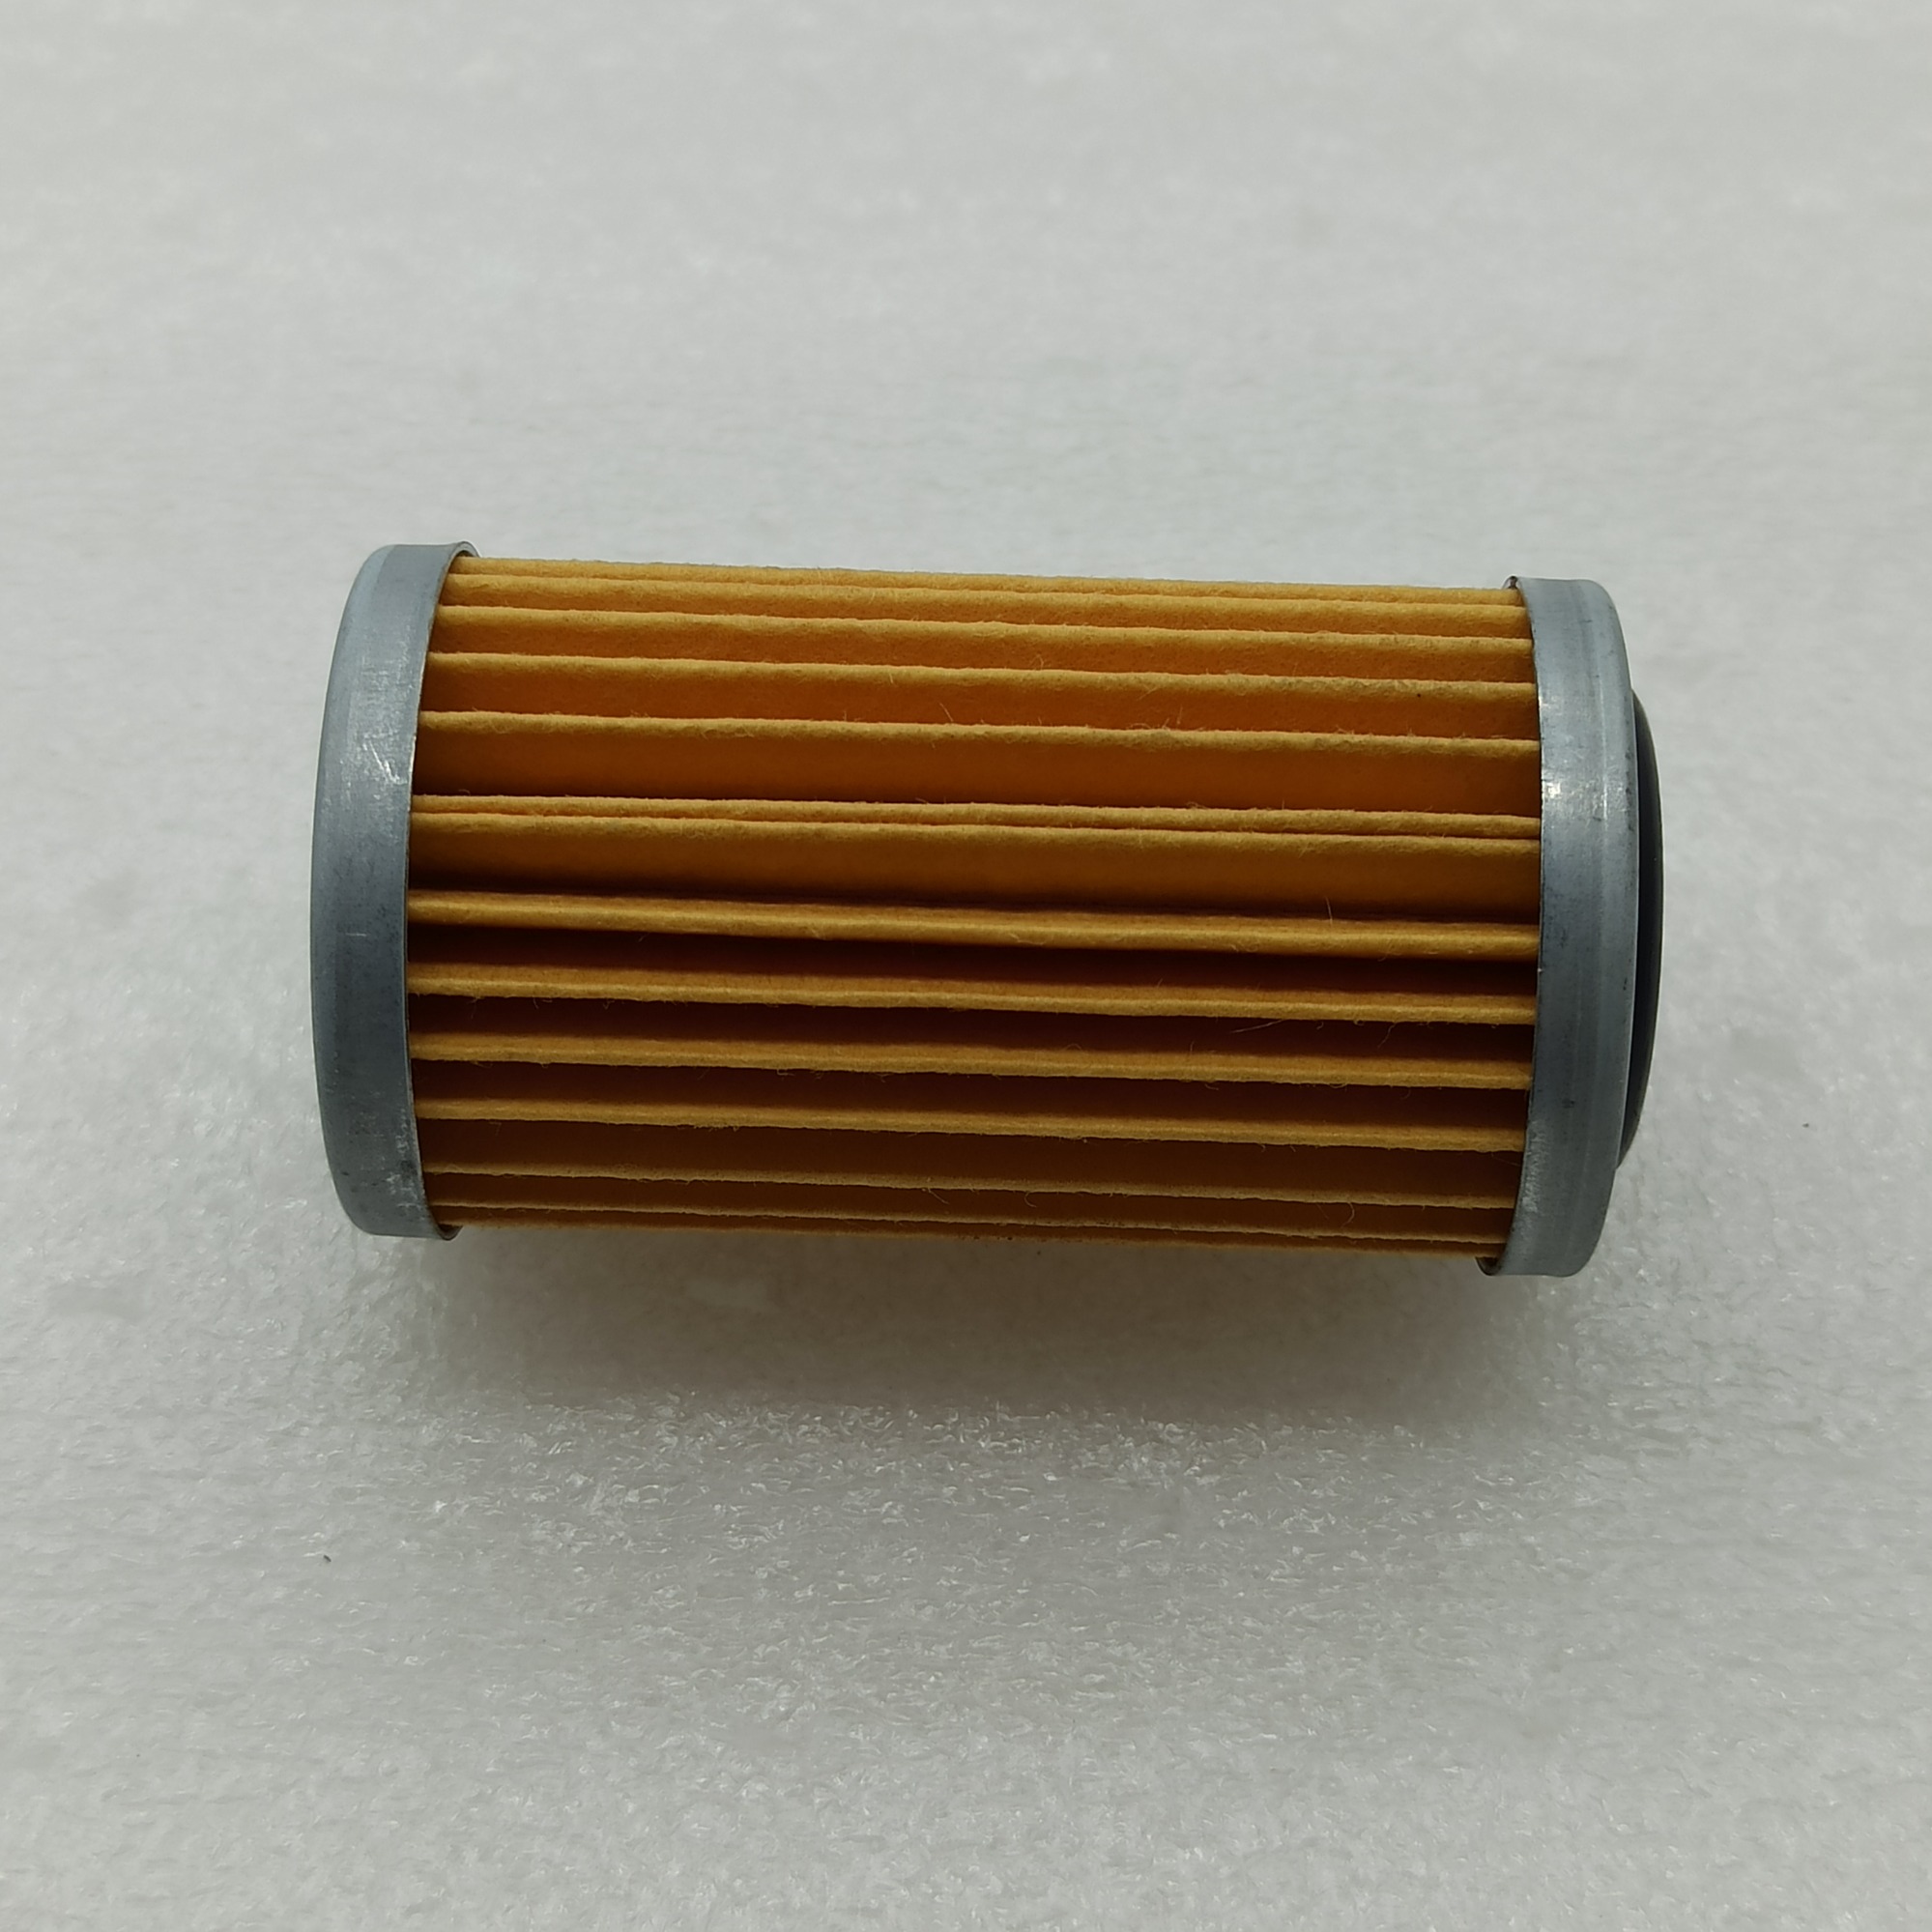 RE0F11A JF015E CVT INPUT PAPER FILTER OUTER FILTER For Ni ssan Sunny 1.5L Tiida Sylphy 1.6L Sale